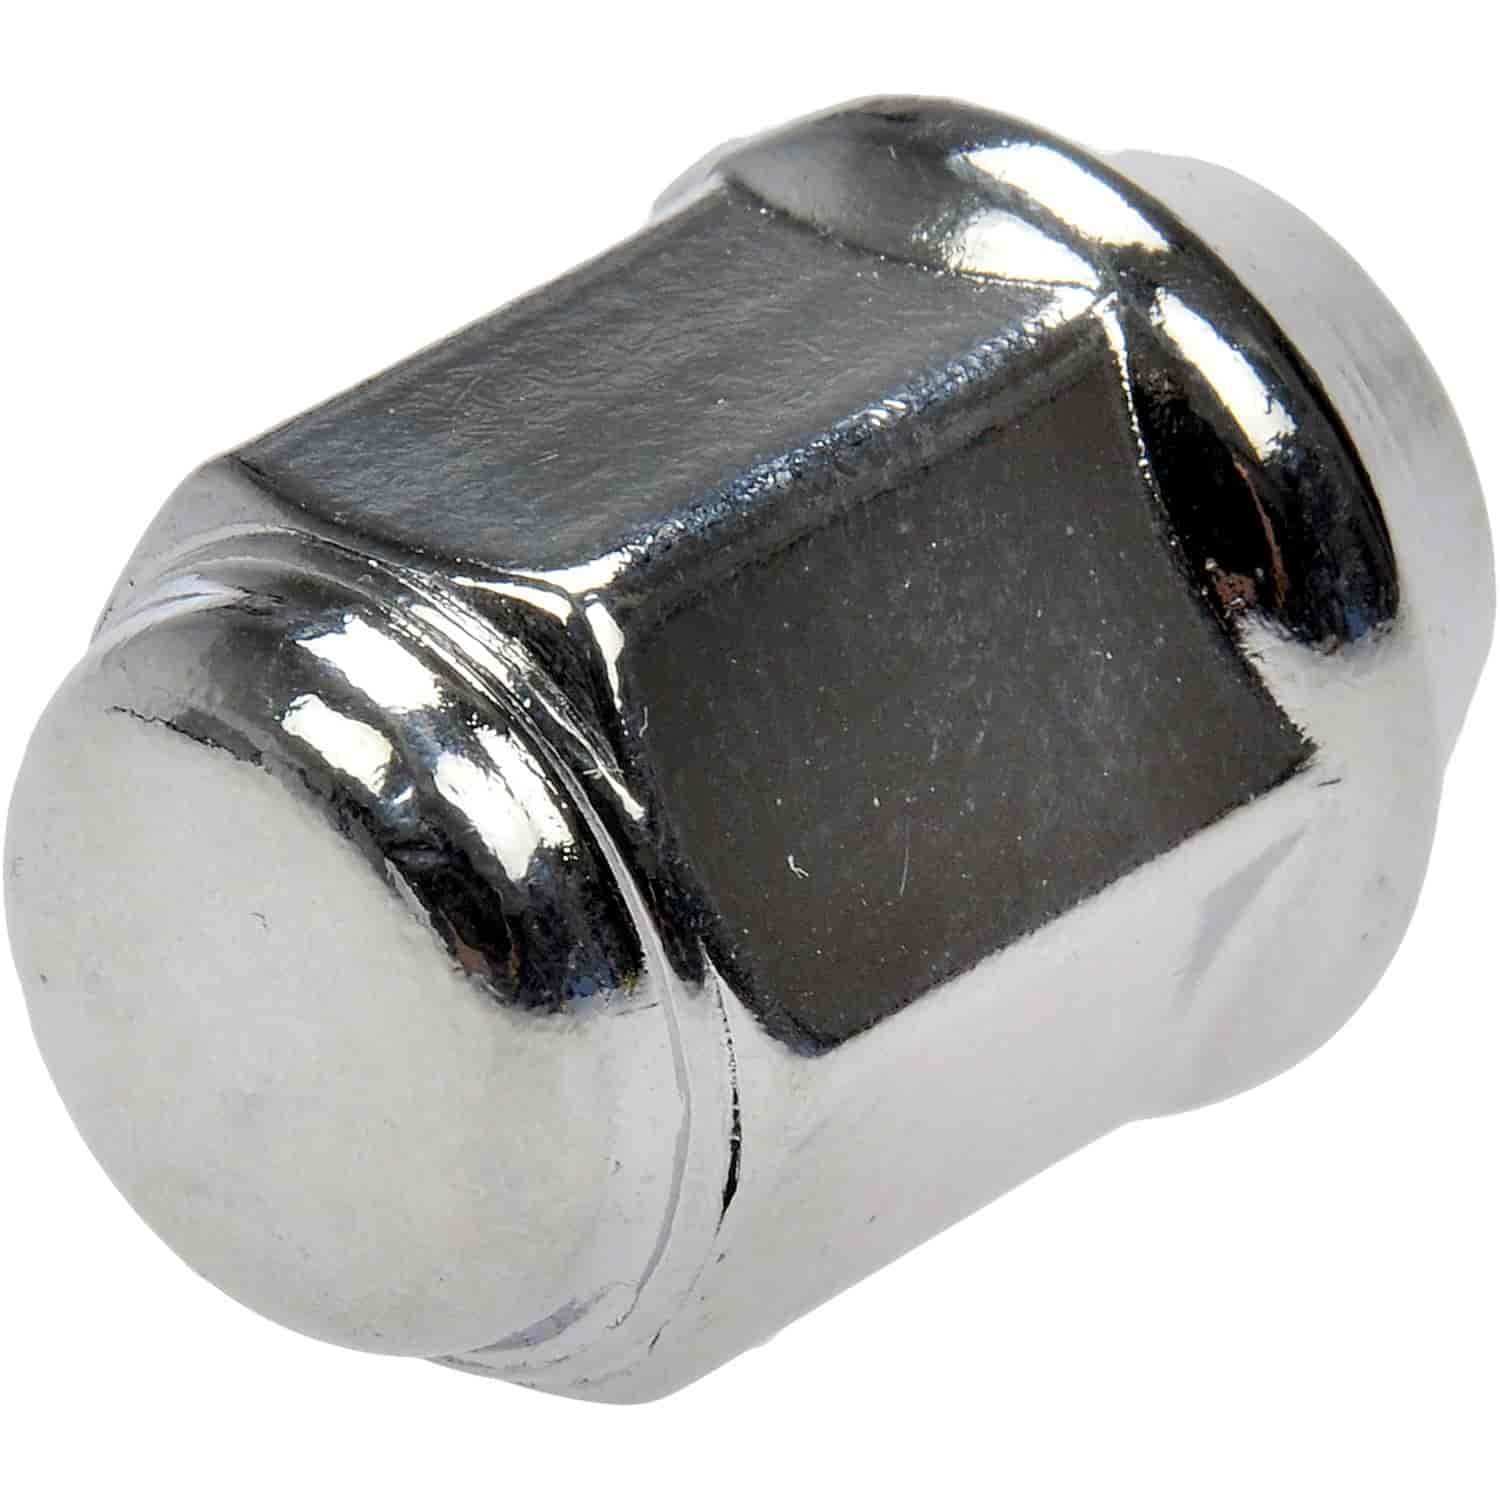 Wheel Nut M12-1.50 Dometop Capped - 19mm Hex